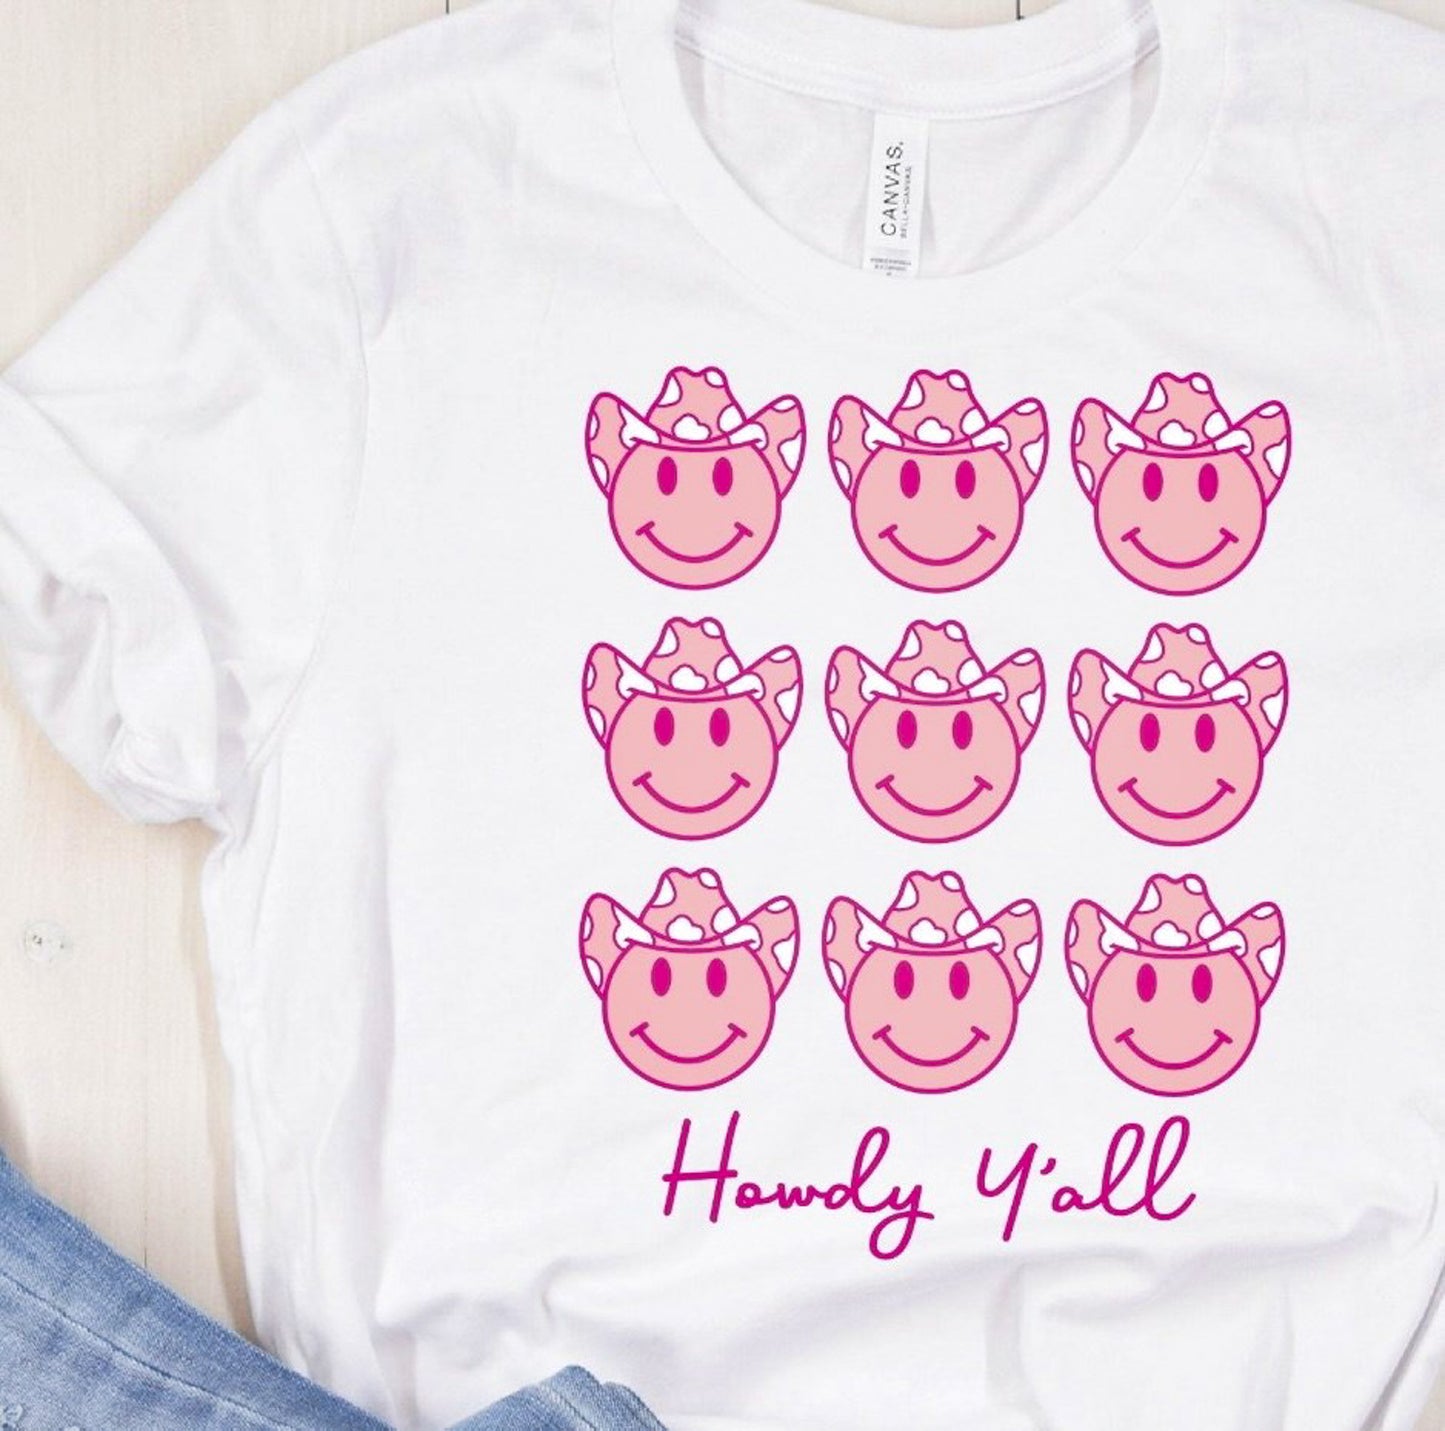 Stacked Smiley Faces Howdy Ya'll Tee